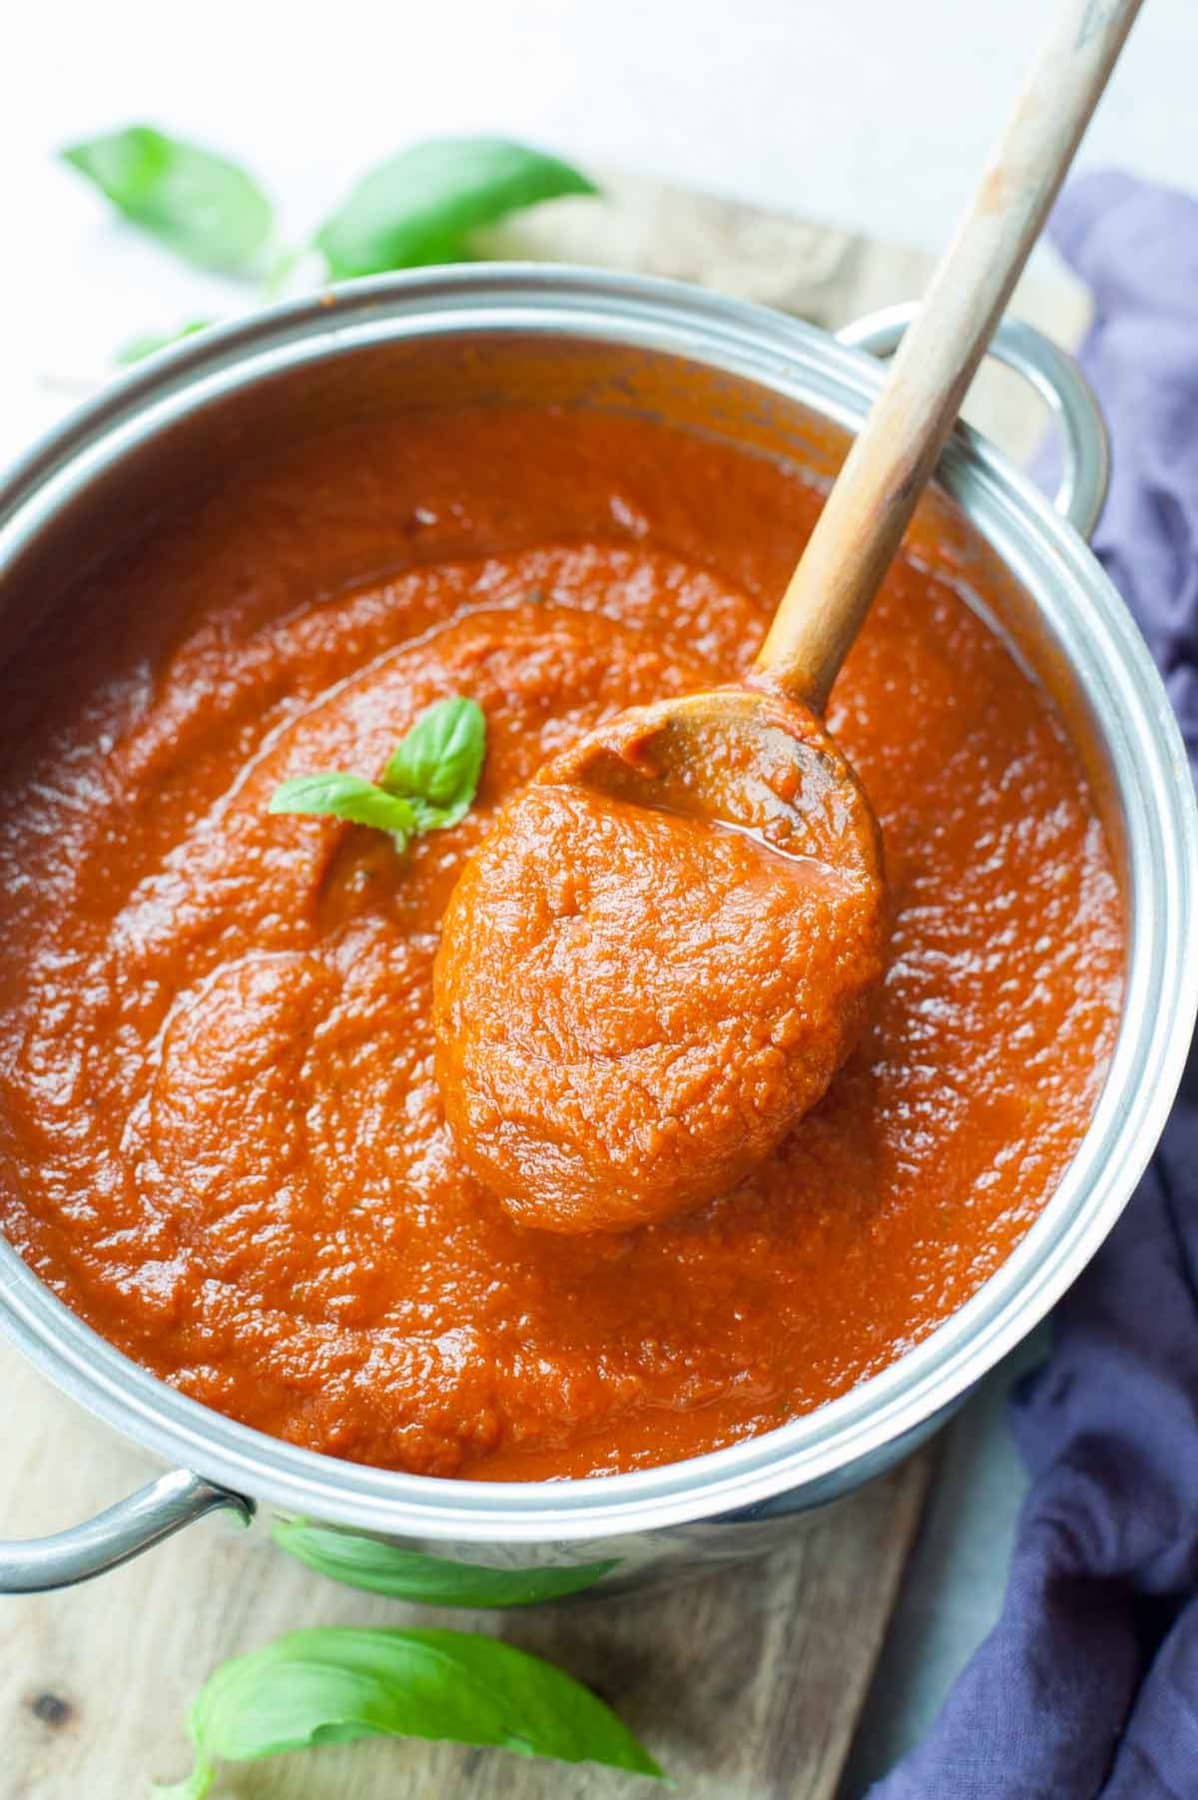 Meatless tomato sauce in a pot is being scooped with a wooden spoon.